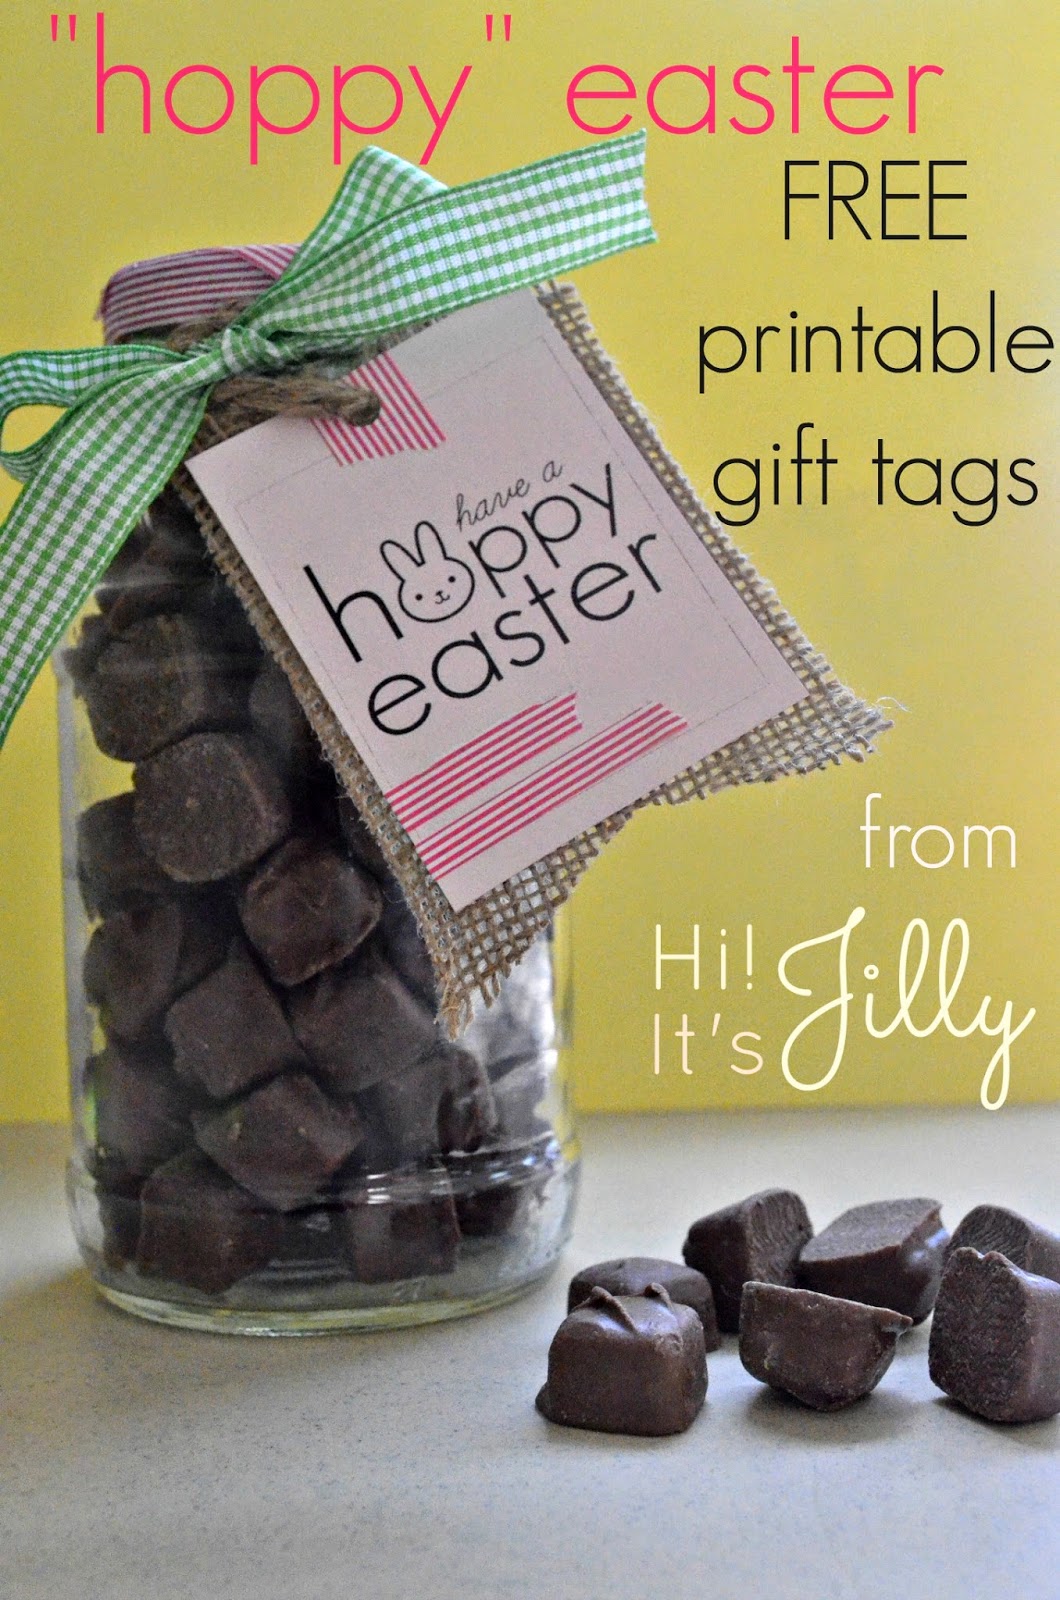 These treat jars are so darling! FREE Printable "Hoppy" Easter gift tag. #easter #gift #printable #shop #EatMoreBites